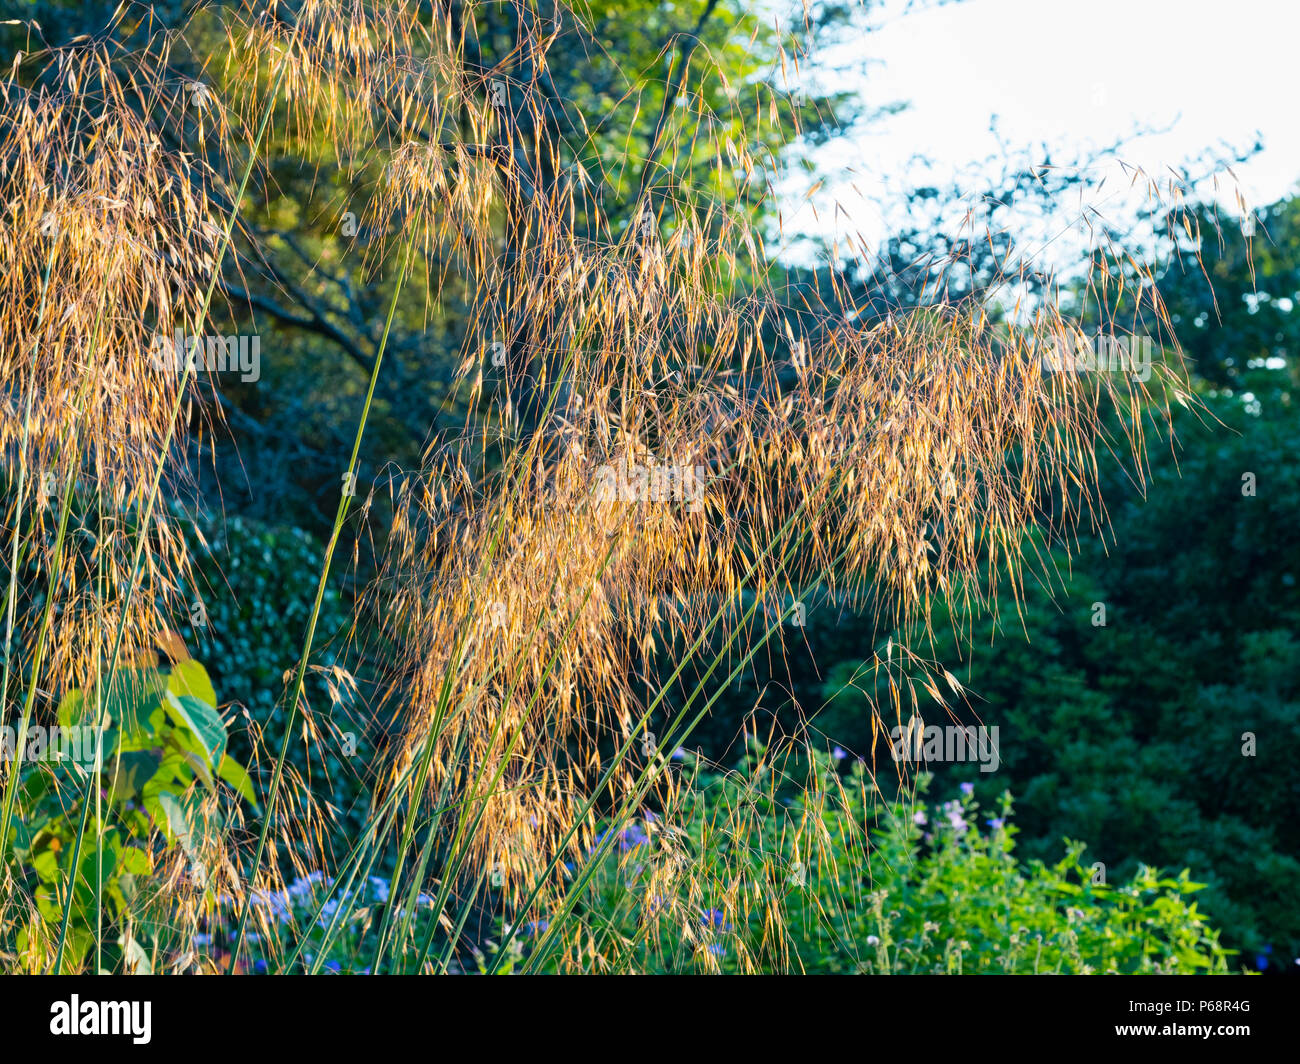 Dangling seed heads of the ornamental grass Stipa gigantea in evening light Stock Photo